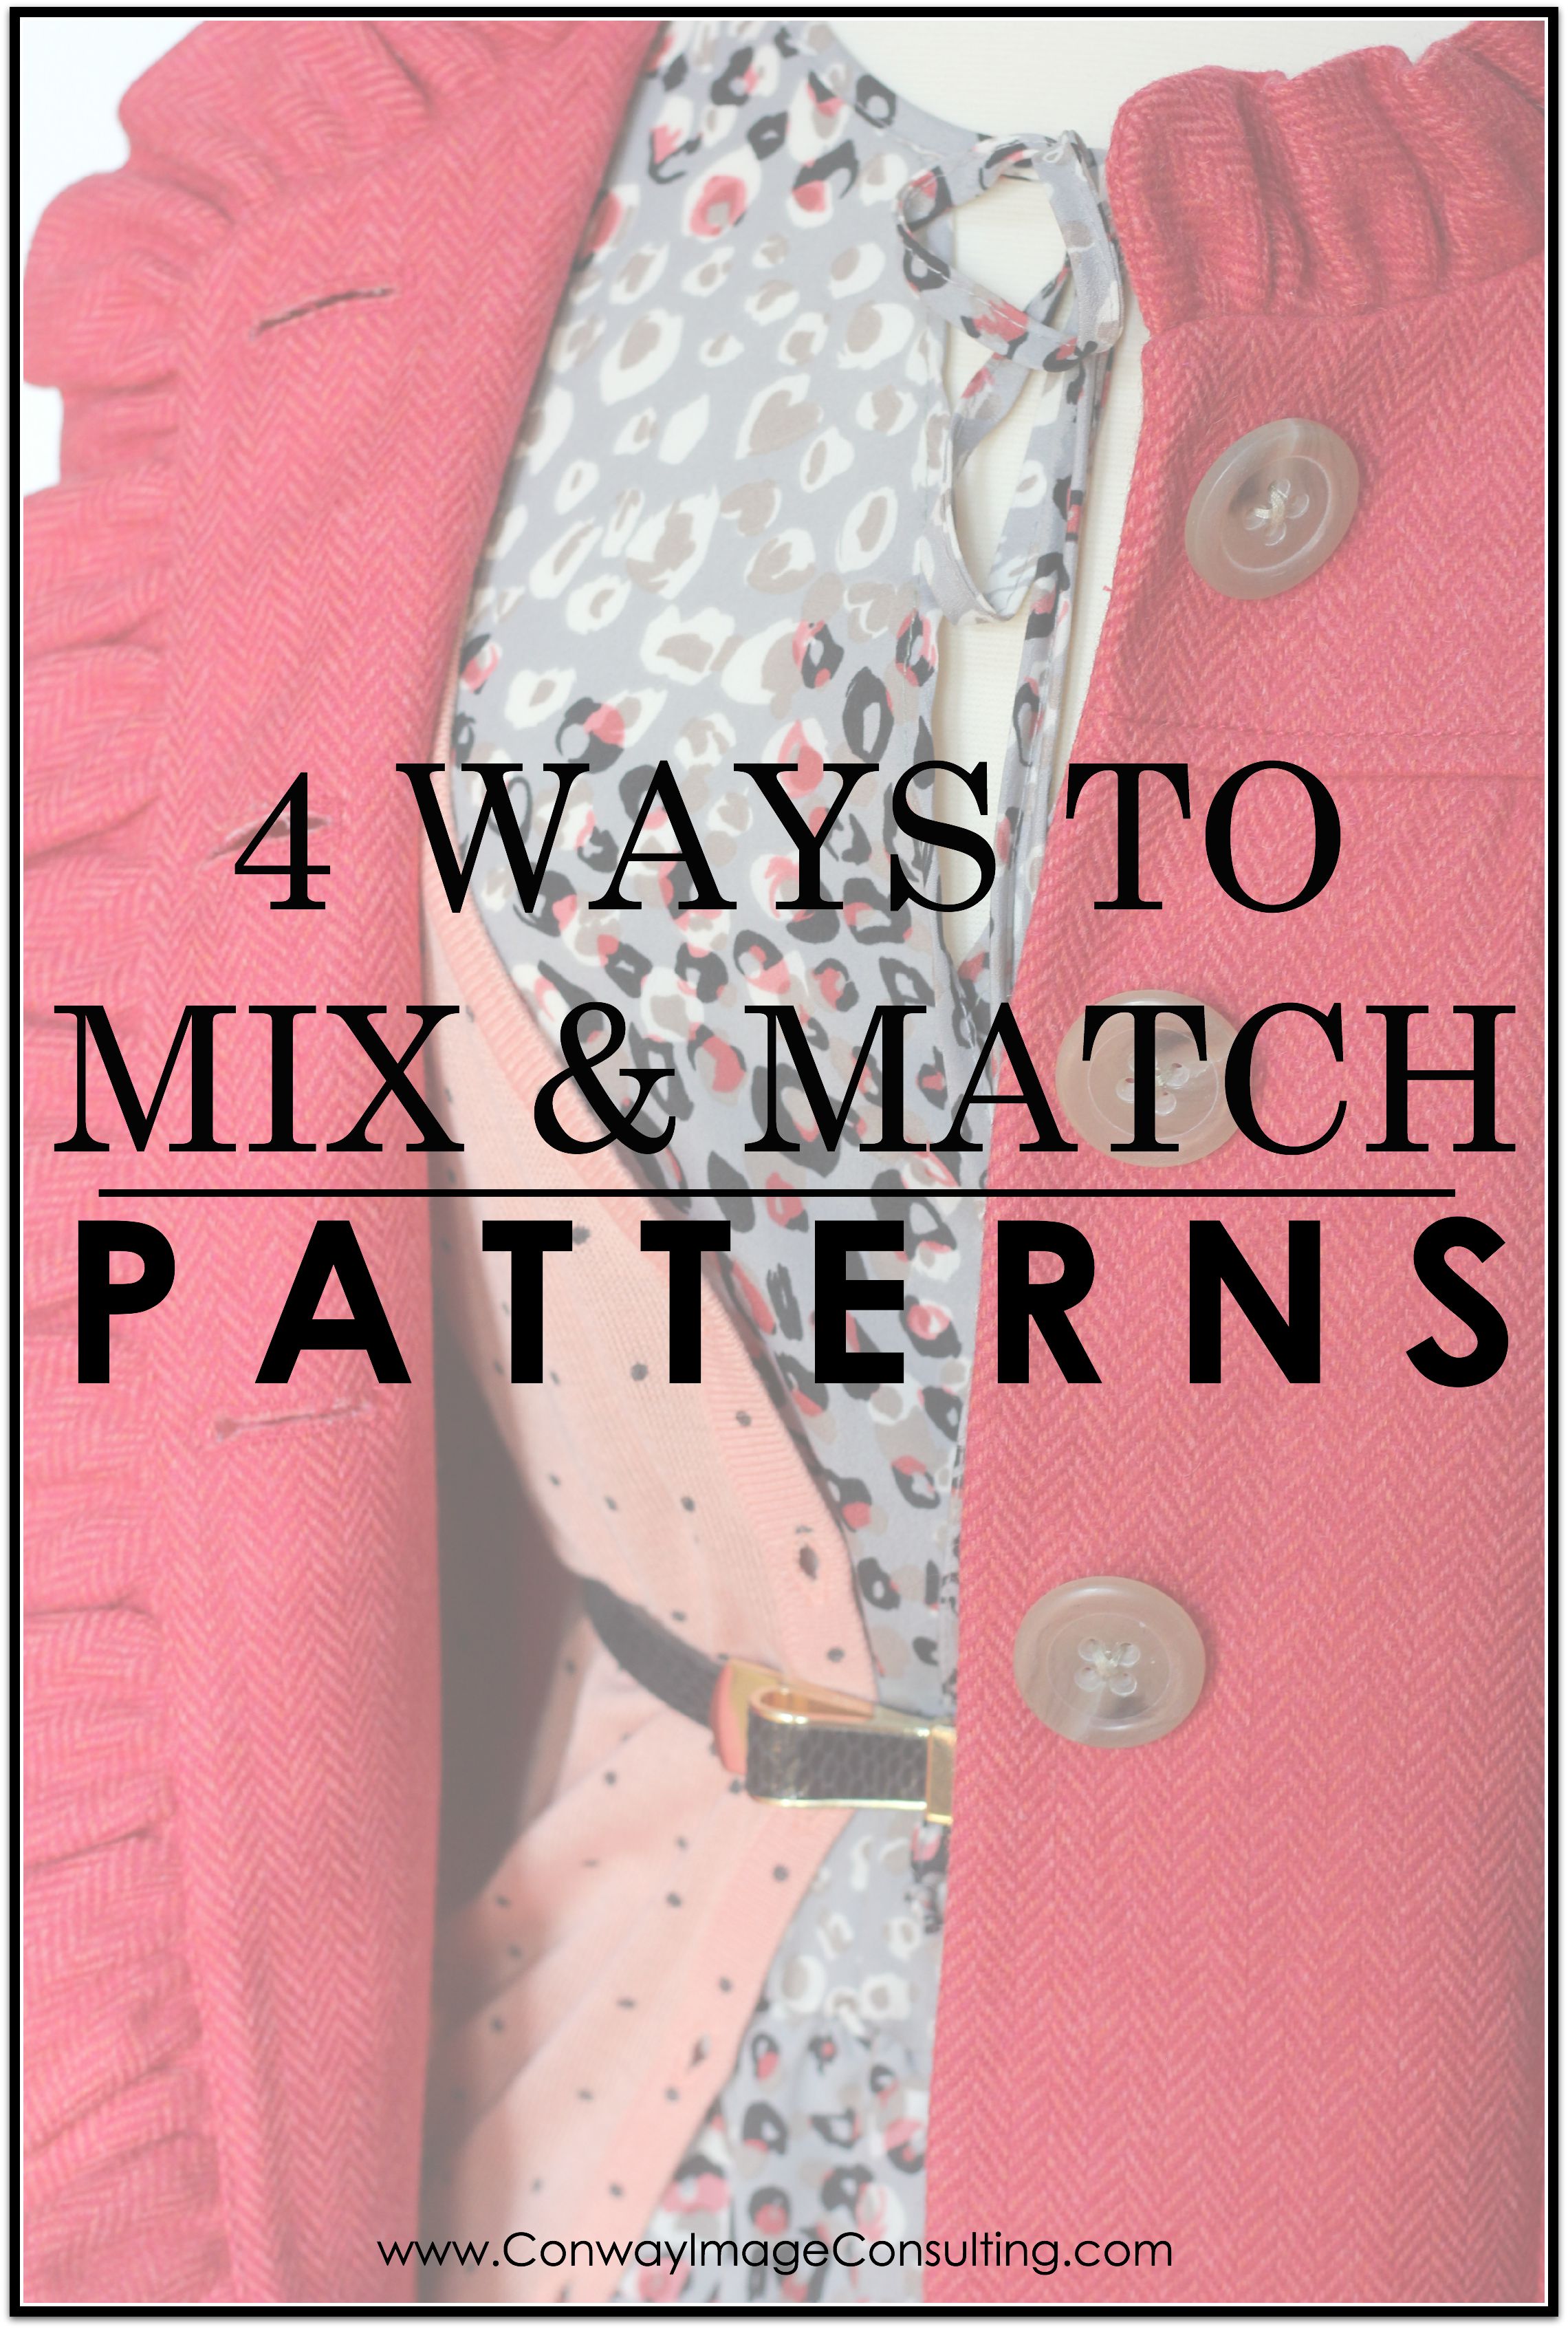 4 Ways to Mix & Match Patterns by Conway Image Consulting